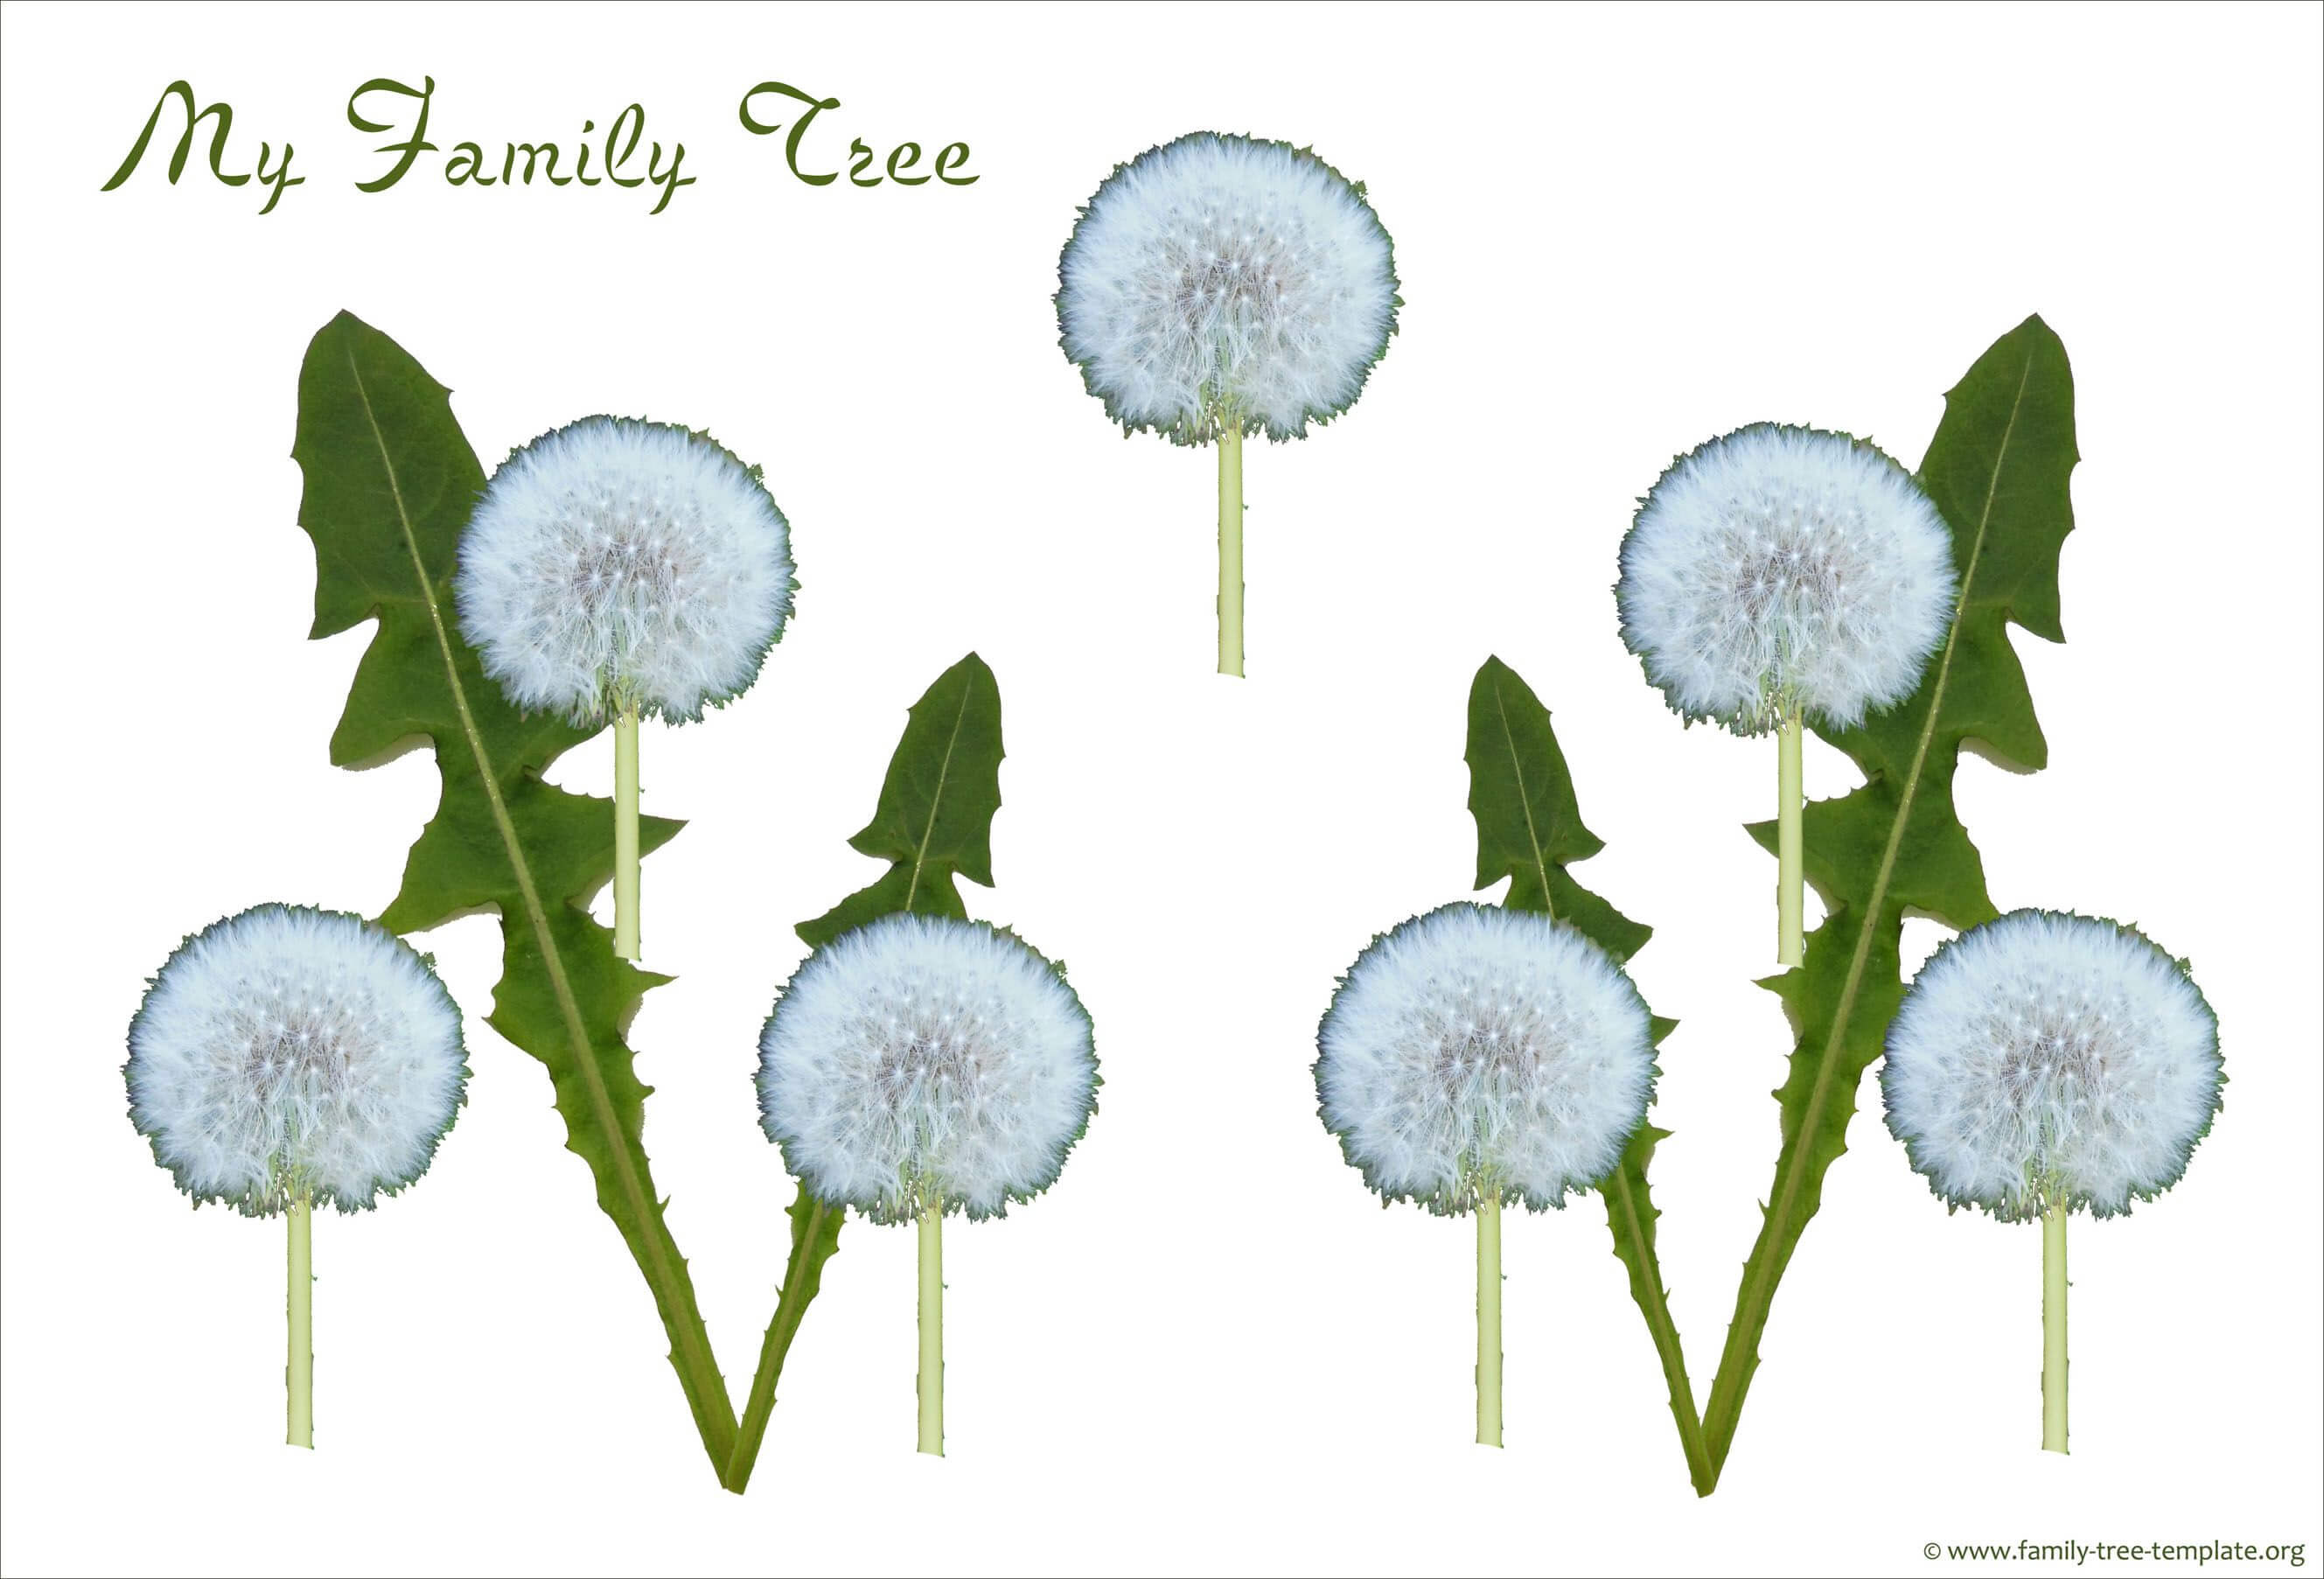 Simple Family Tree With 3 Generations For The Small Child Throughout Blank Family Tree Template 3 Generations